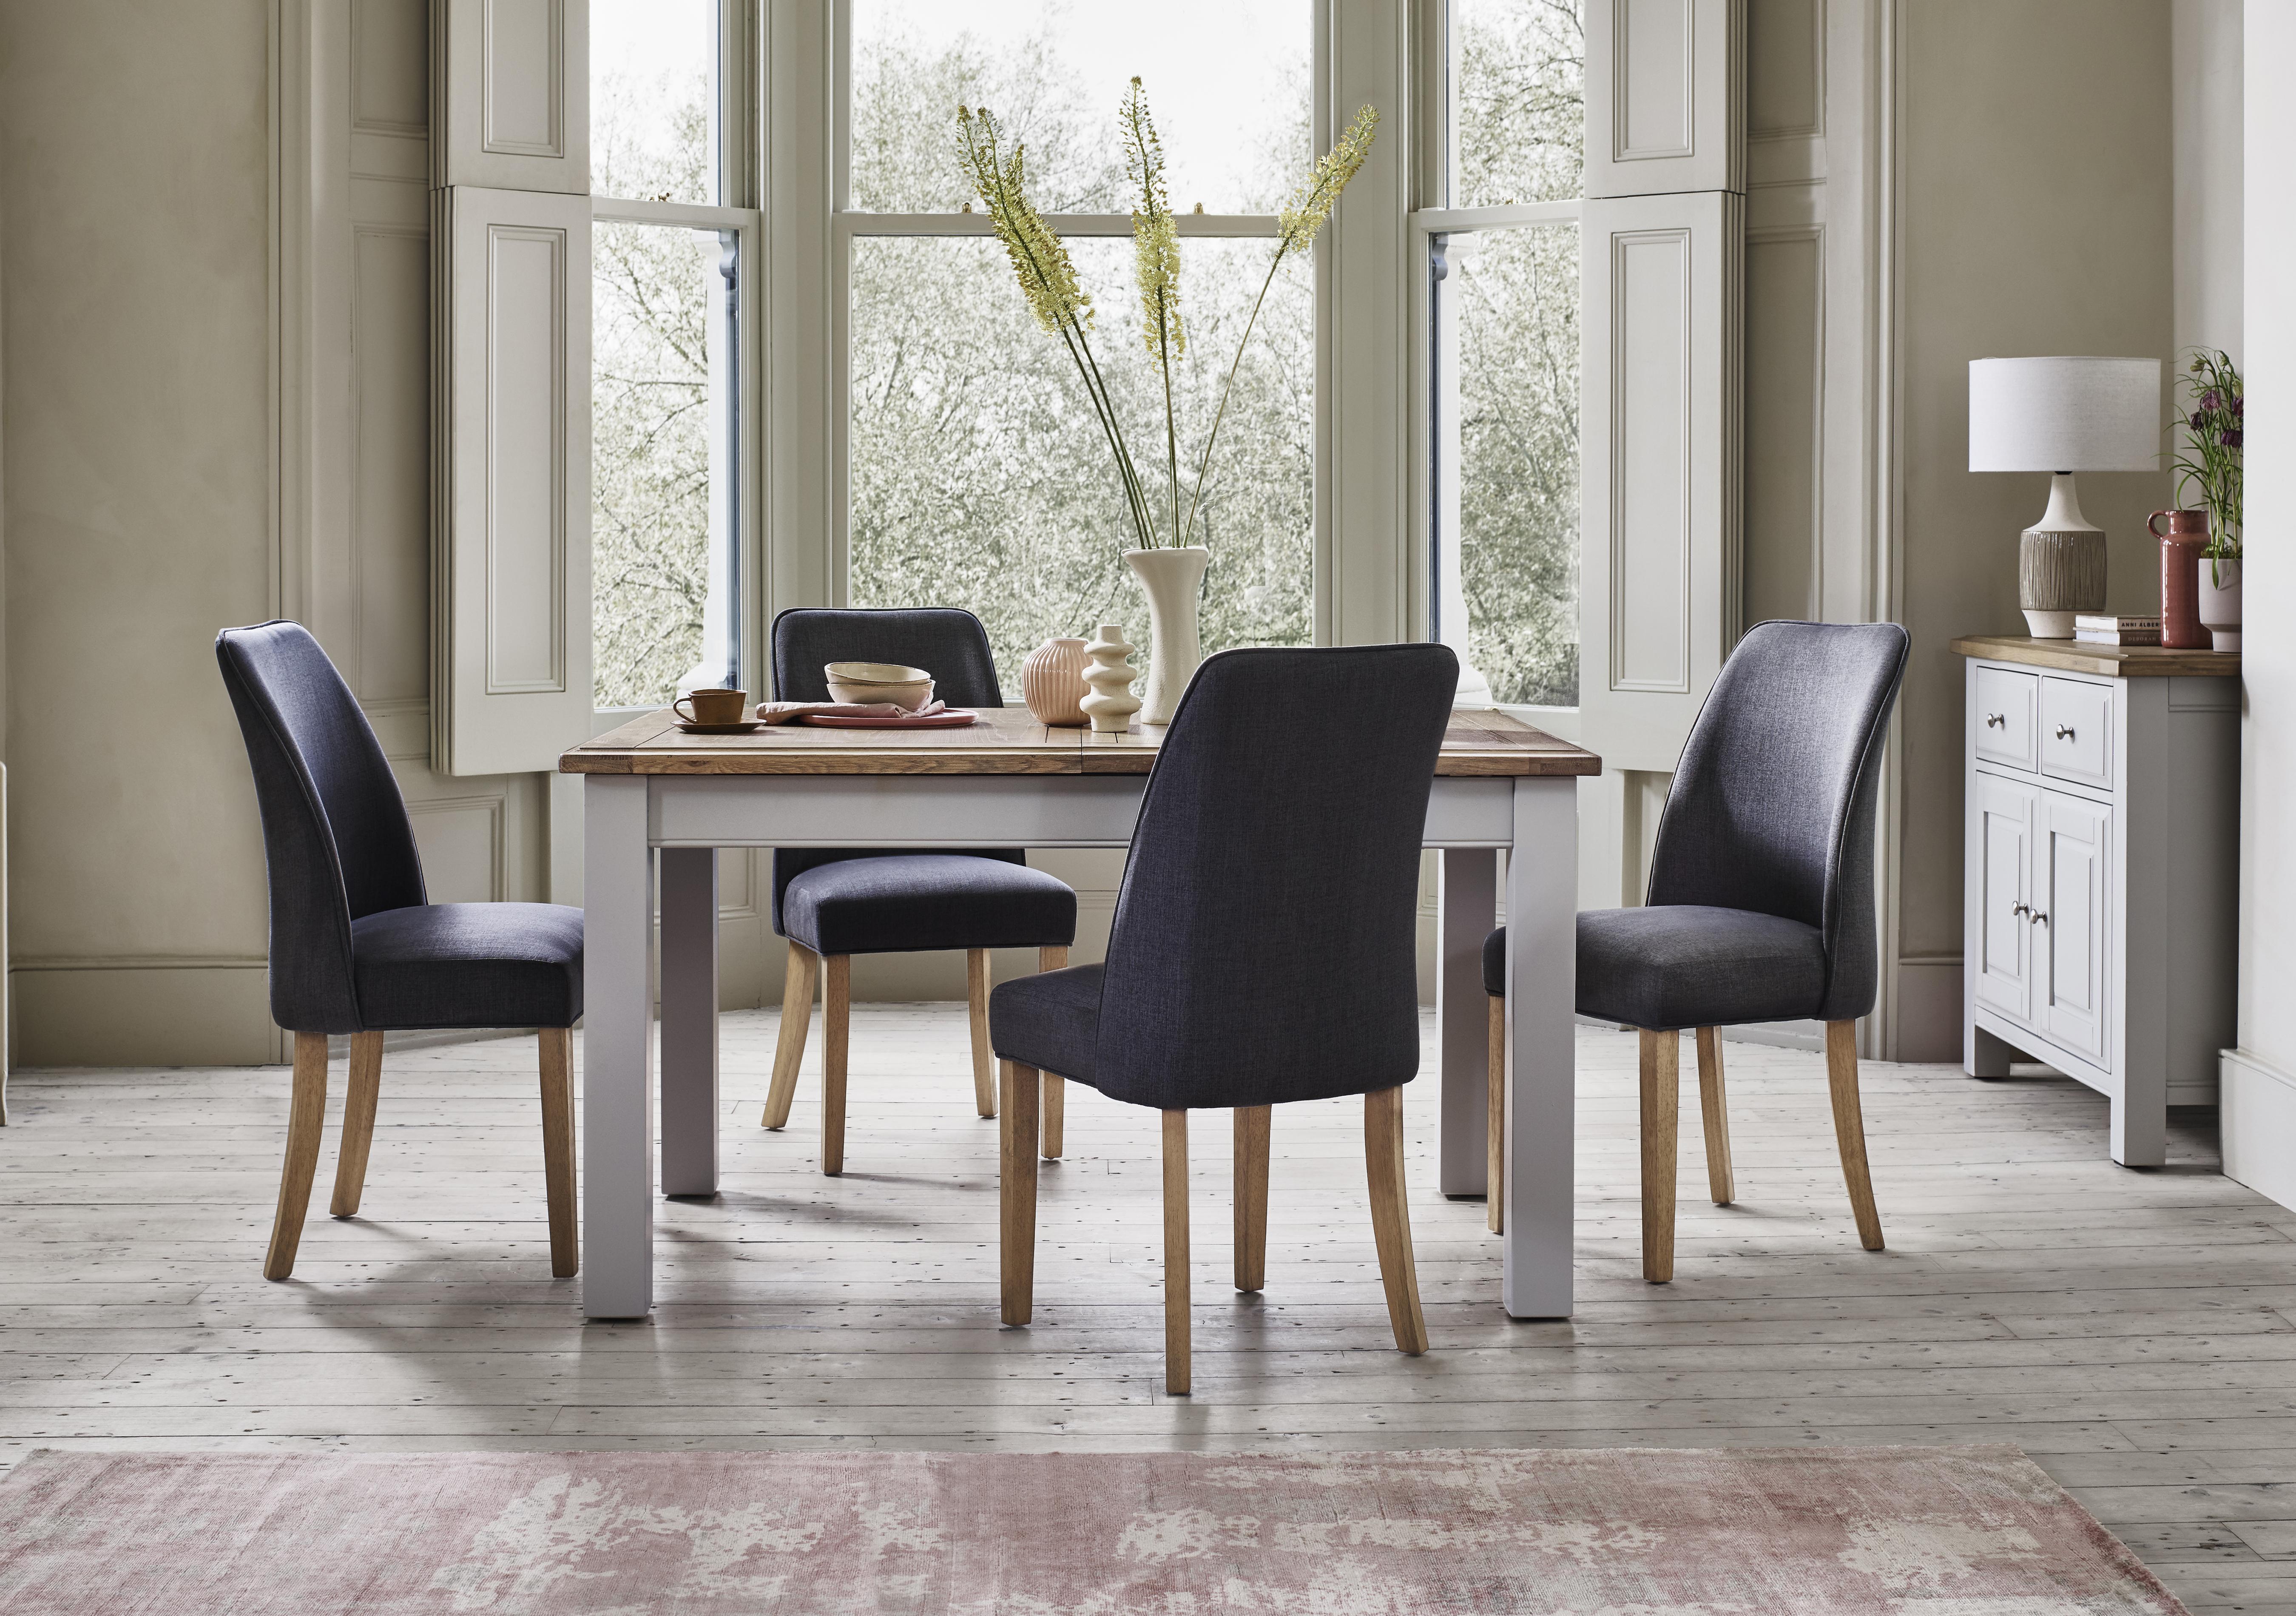 Hamilton Rectangular Extending Dining Table and 4 Fabric Dining Chairs in  on Furniture Village